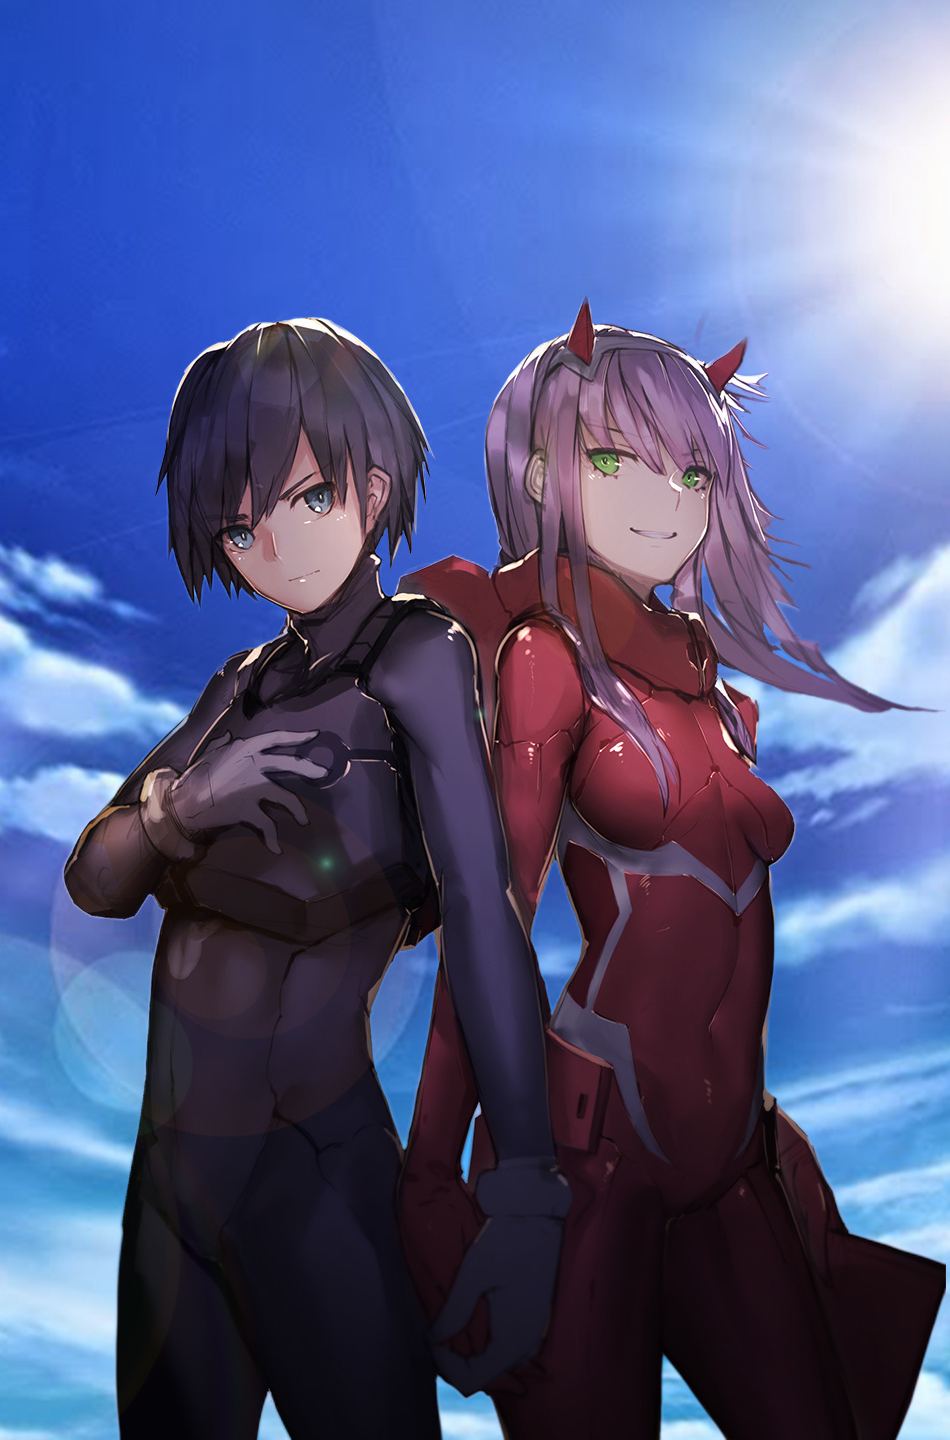 Download wallpaper 950x1534 hiro and zero two, anime, happy, couple,  iphone, 950x1534 hd background, 8169